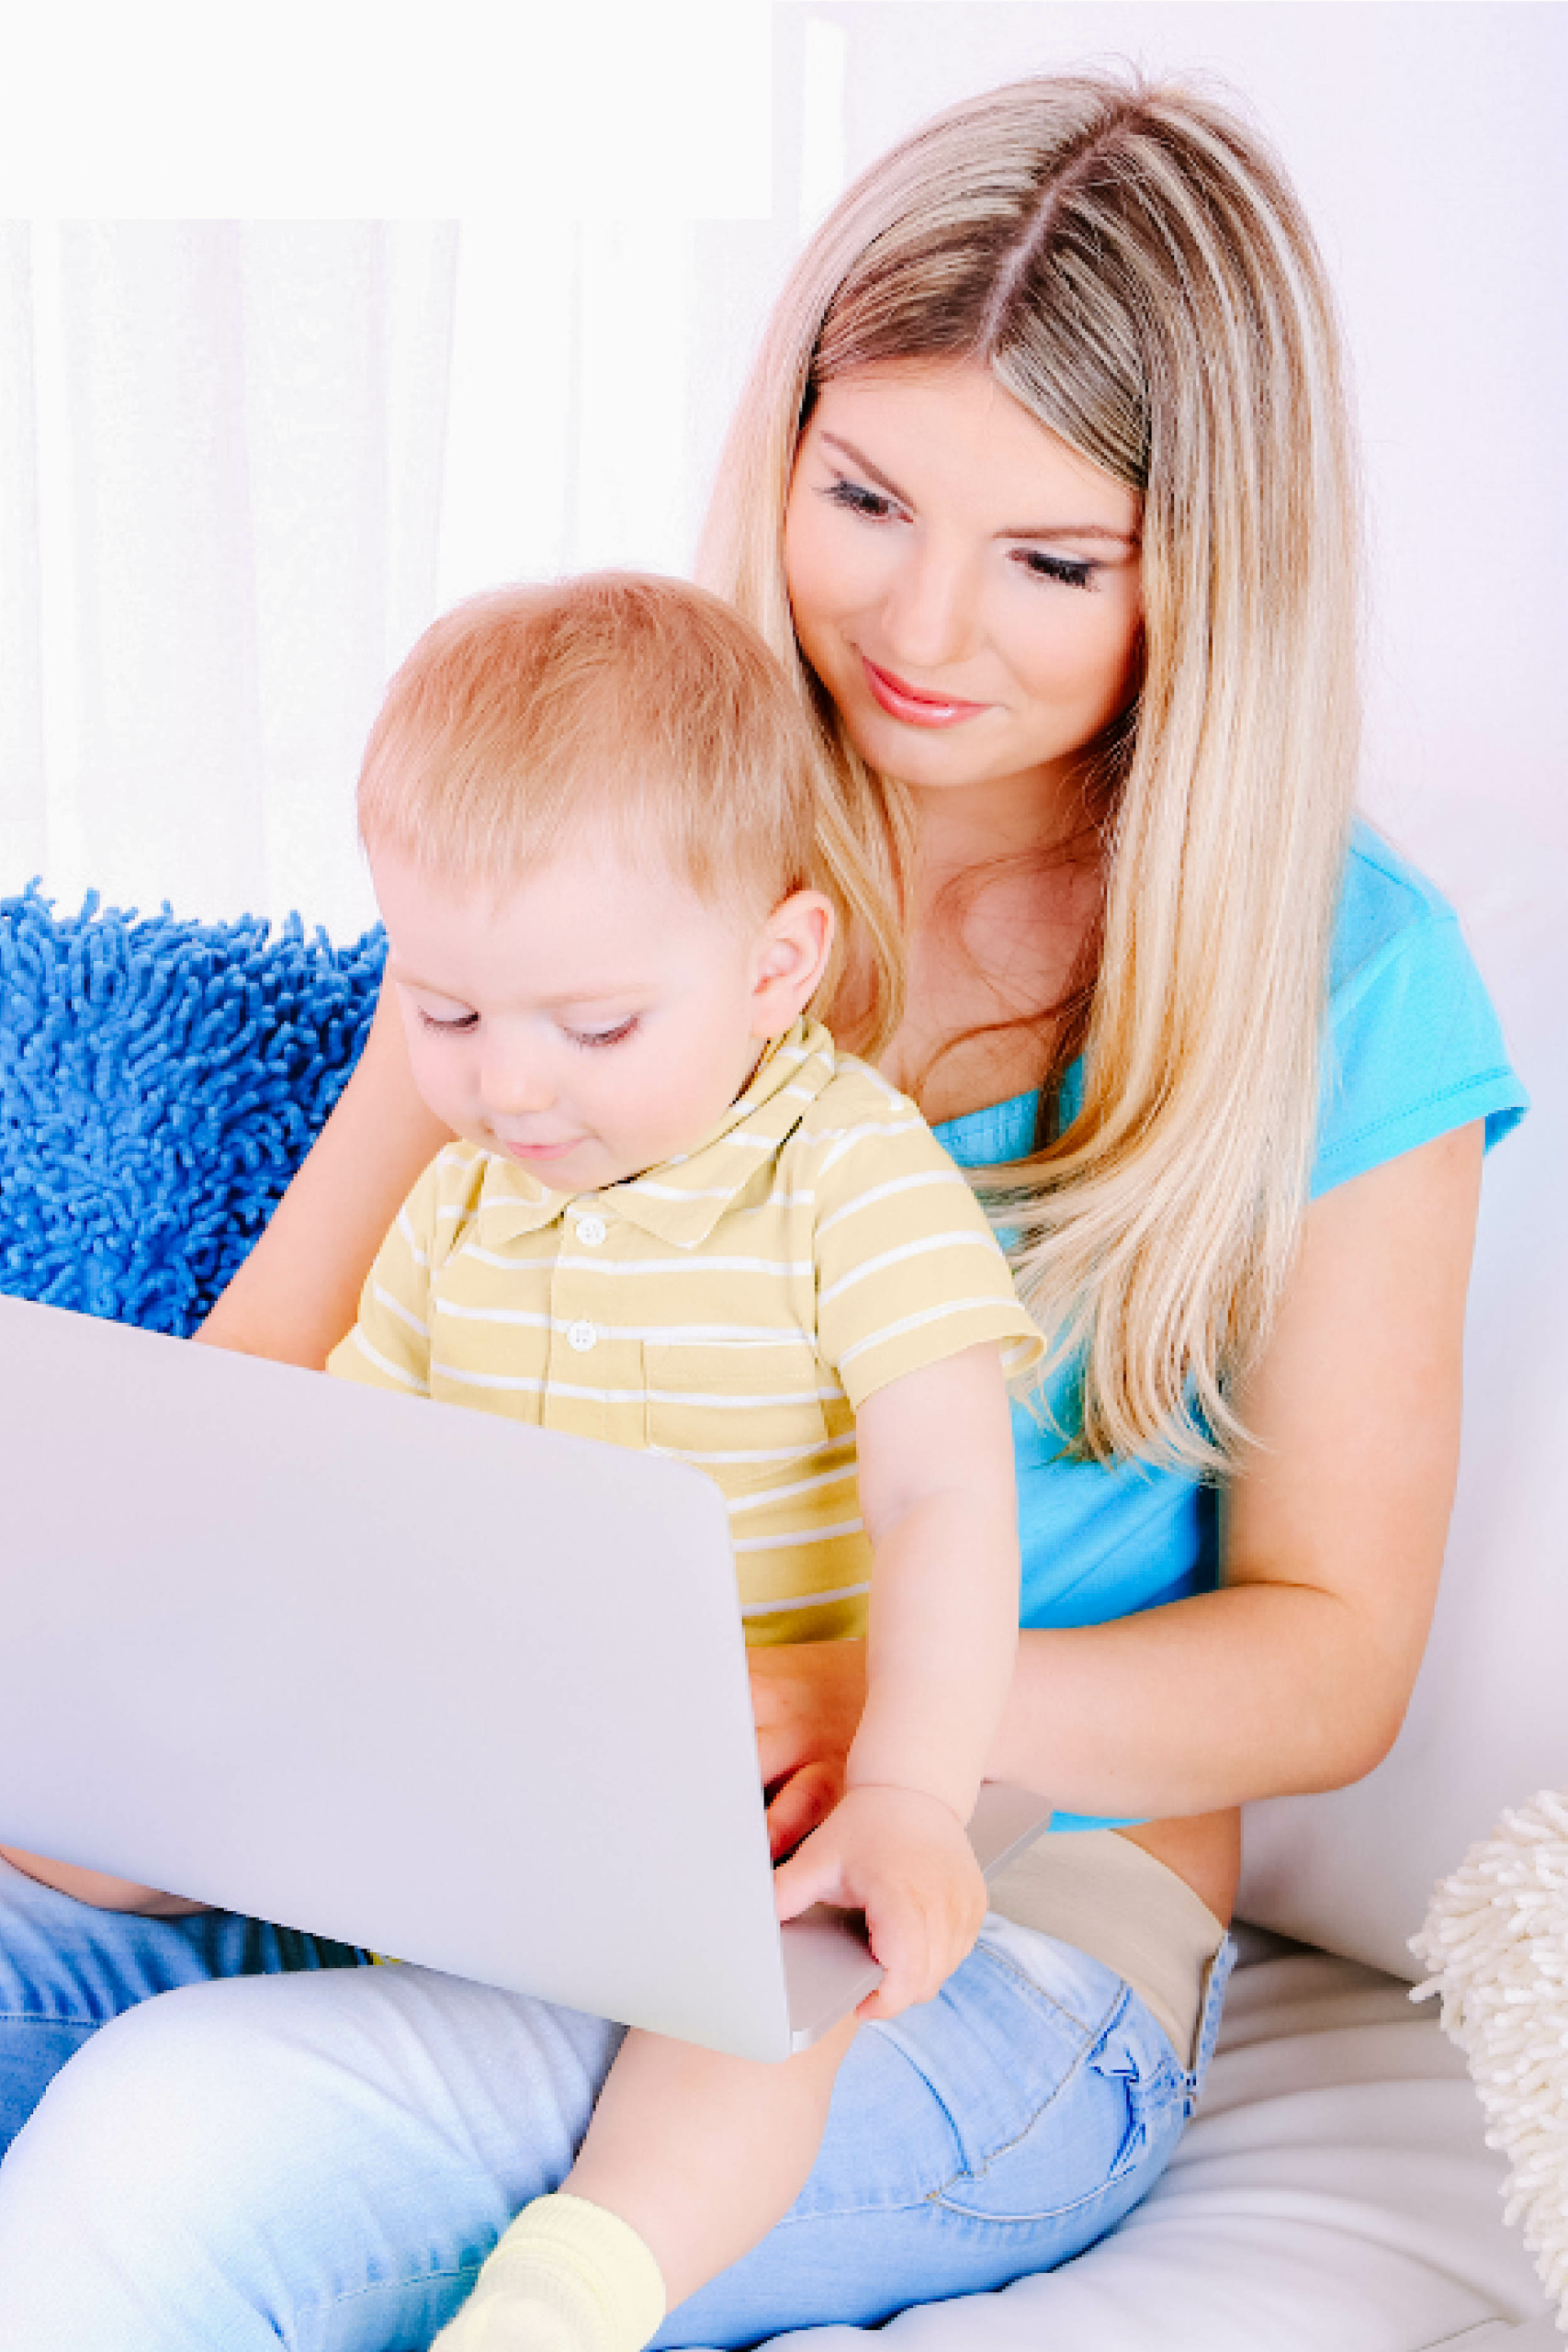 Work at Home Gigs for SAHM